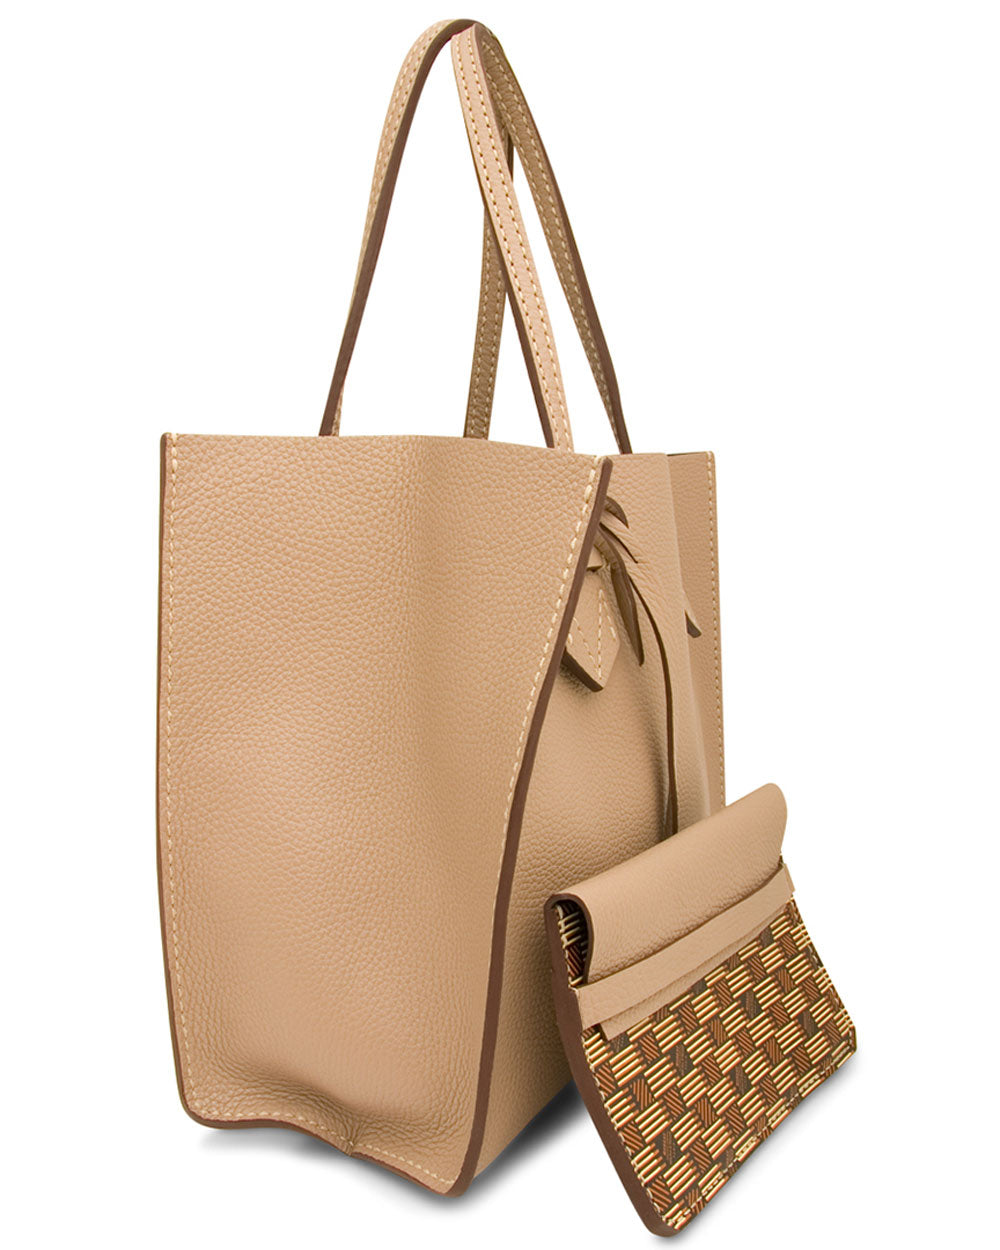 Bregancon Reversible Tote in Beige and Blue